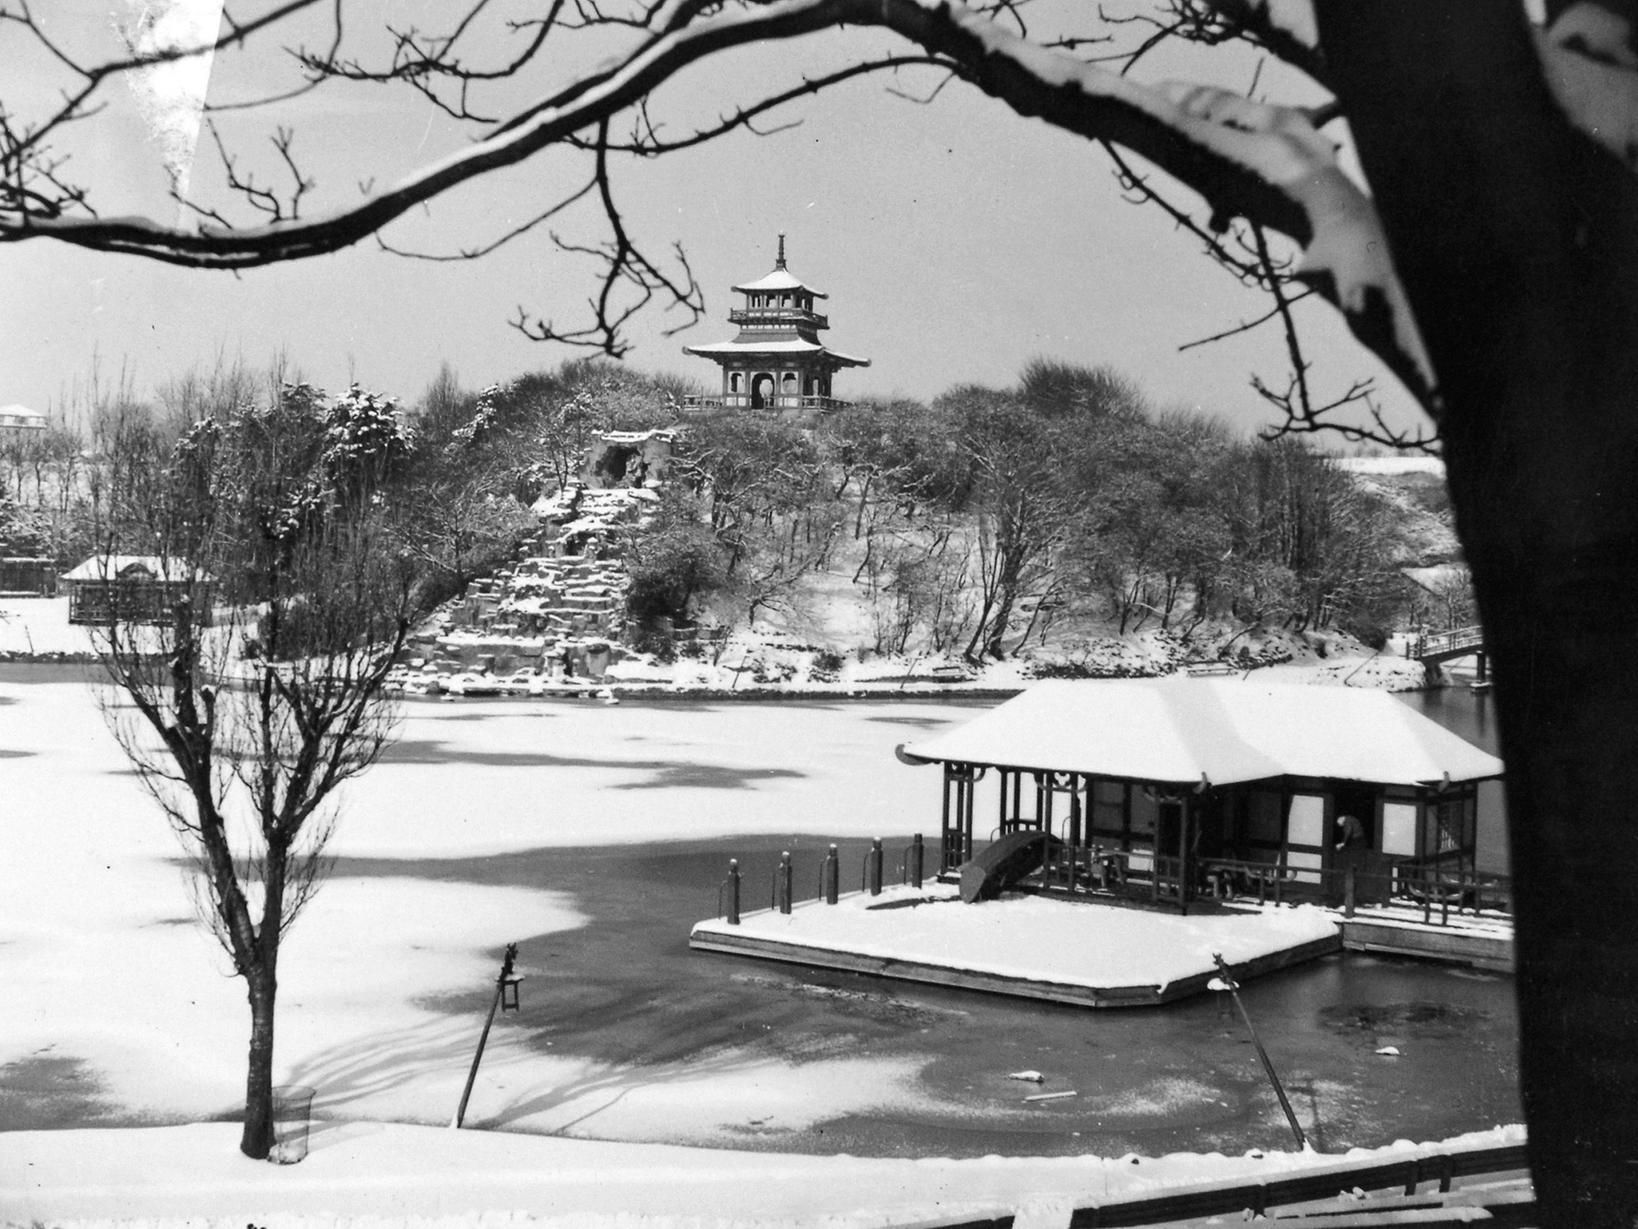 Peasholm Park and lake frozen over in the 1940s.